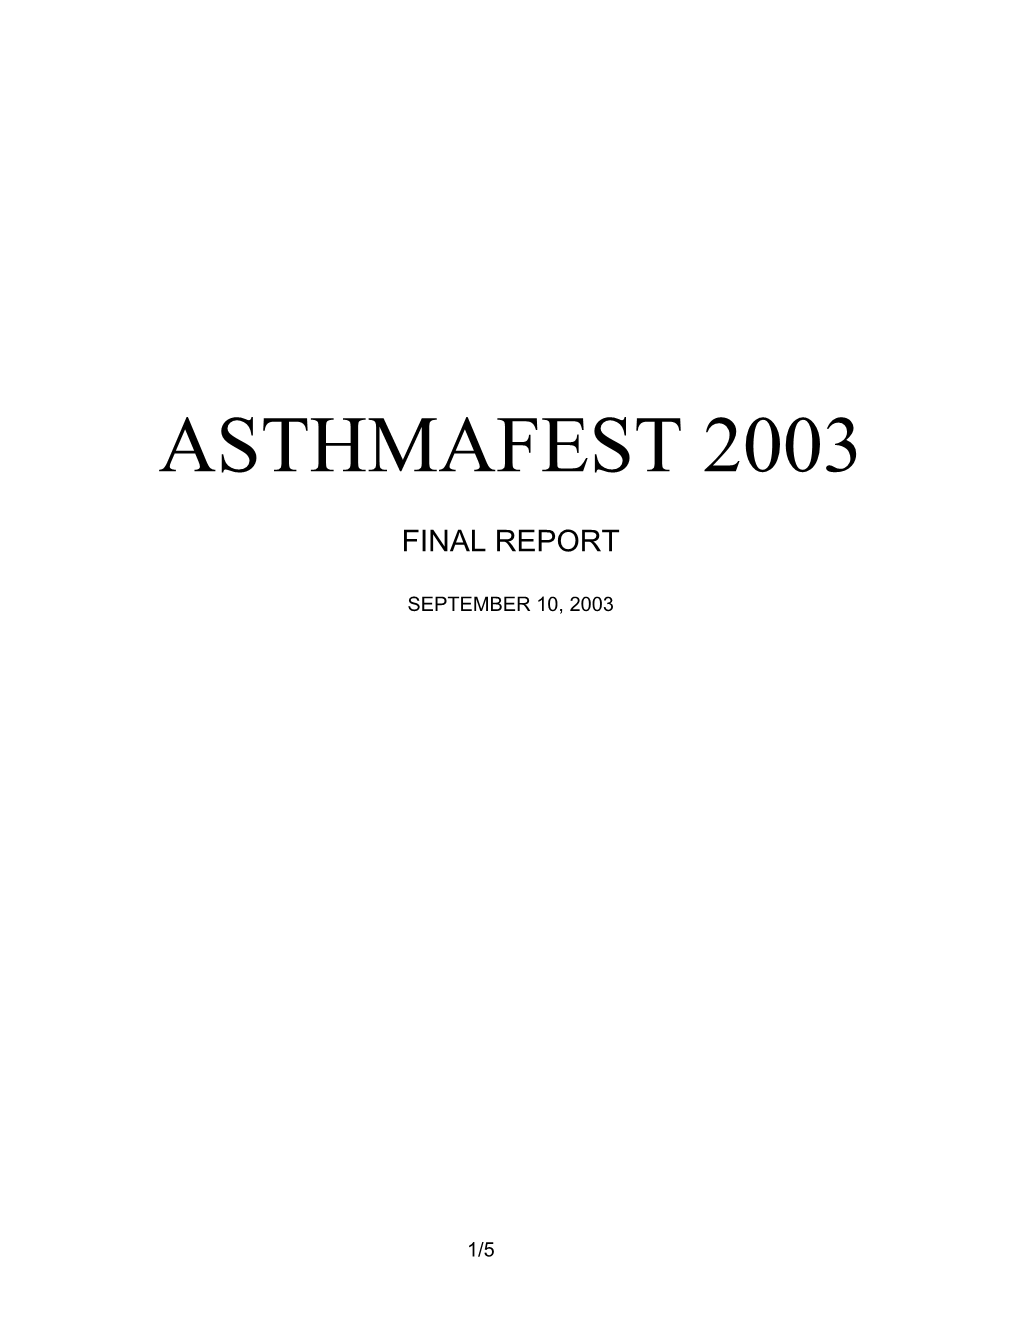 Asthmafest 2003 Emerged from Feedback from School Nurses and Allies Against Asthma (AAA)